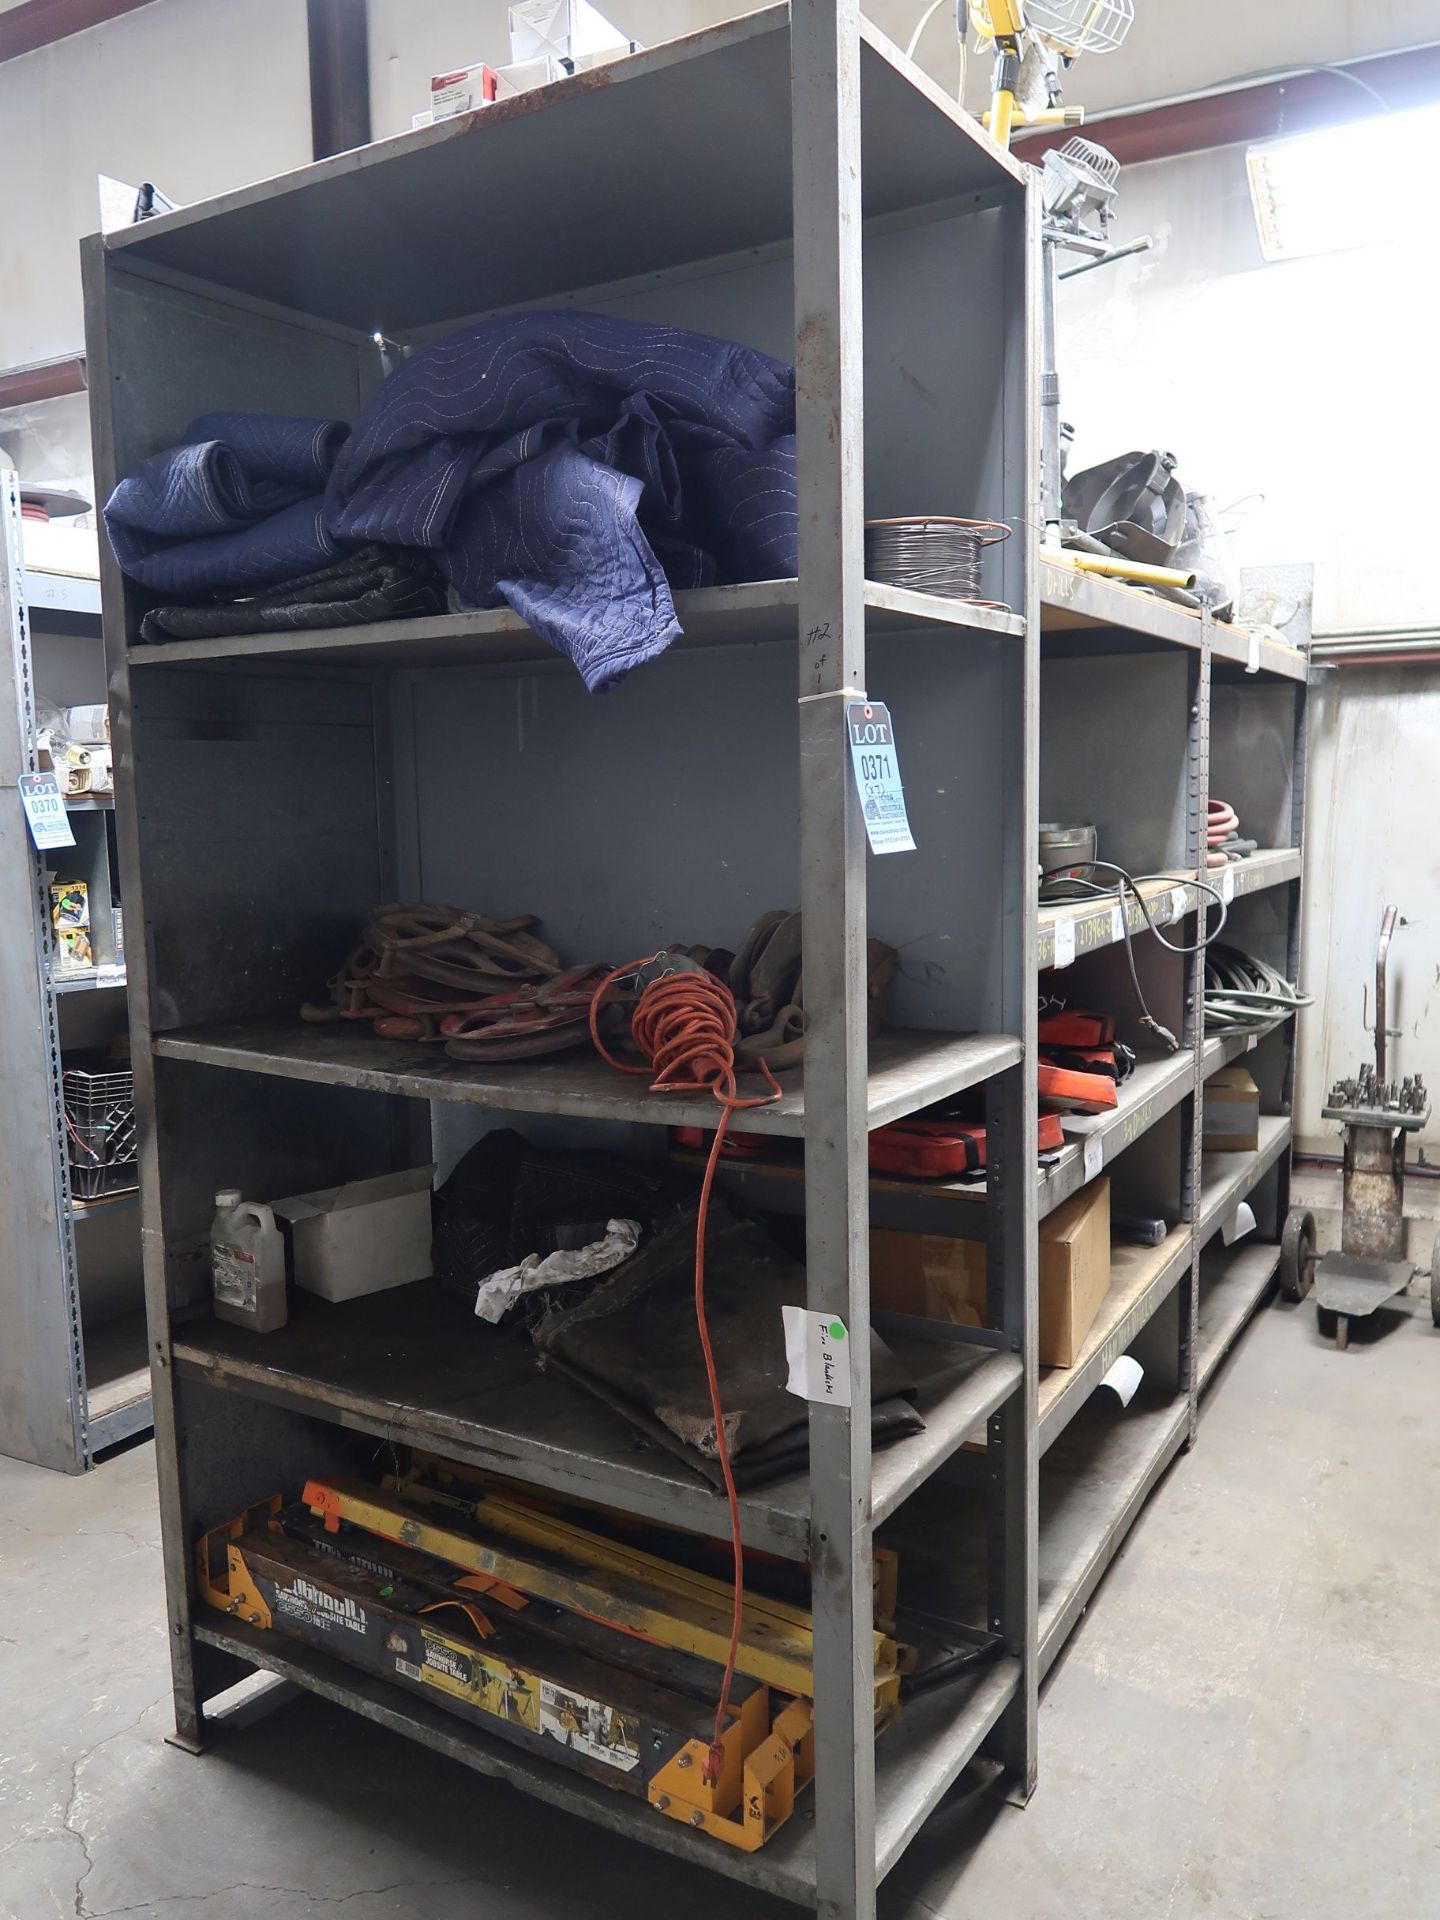 SECTIONS MISCELLANEOUS SIZE STEEL SHELVING **DELAY REMOVAL - PICK UP ON 4-17-2018** - Image 2 of 6